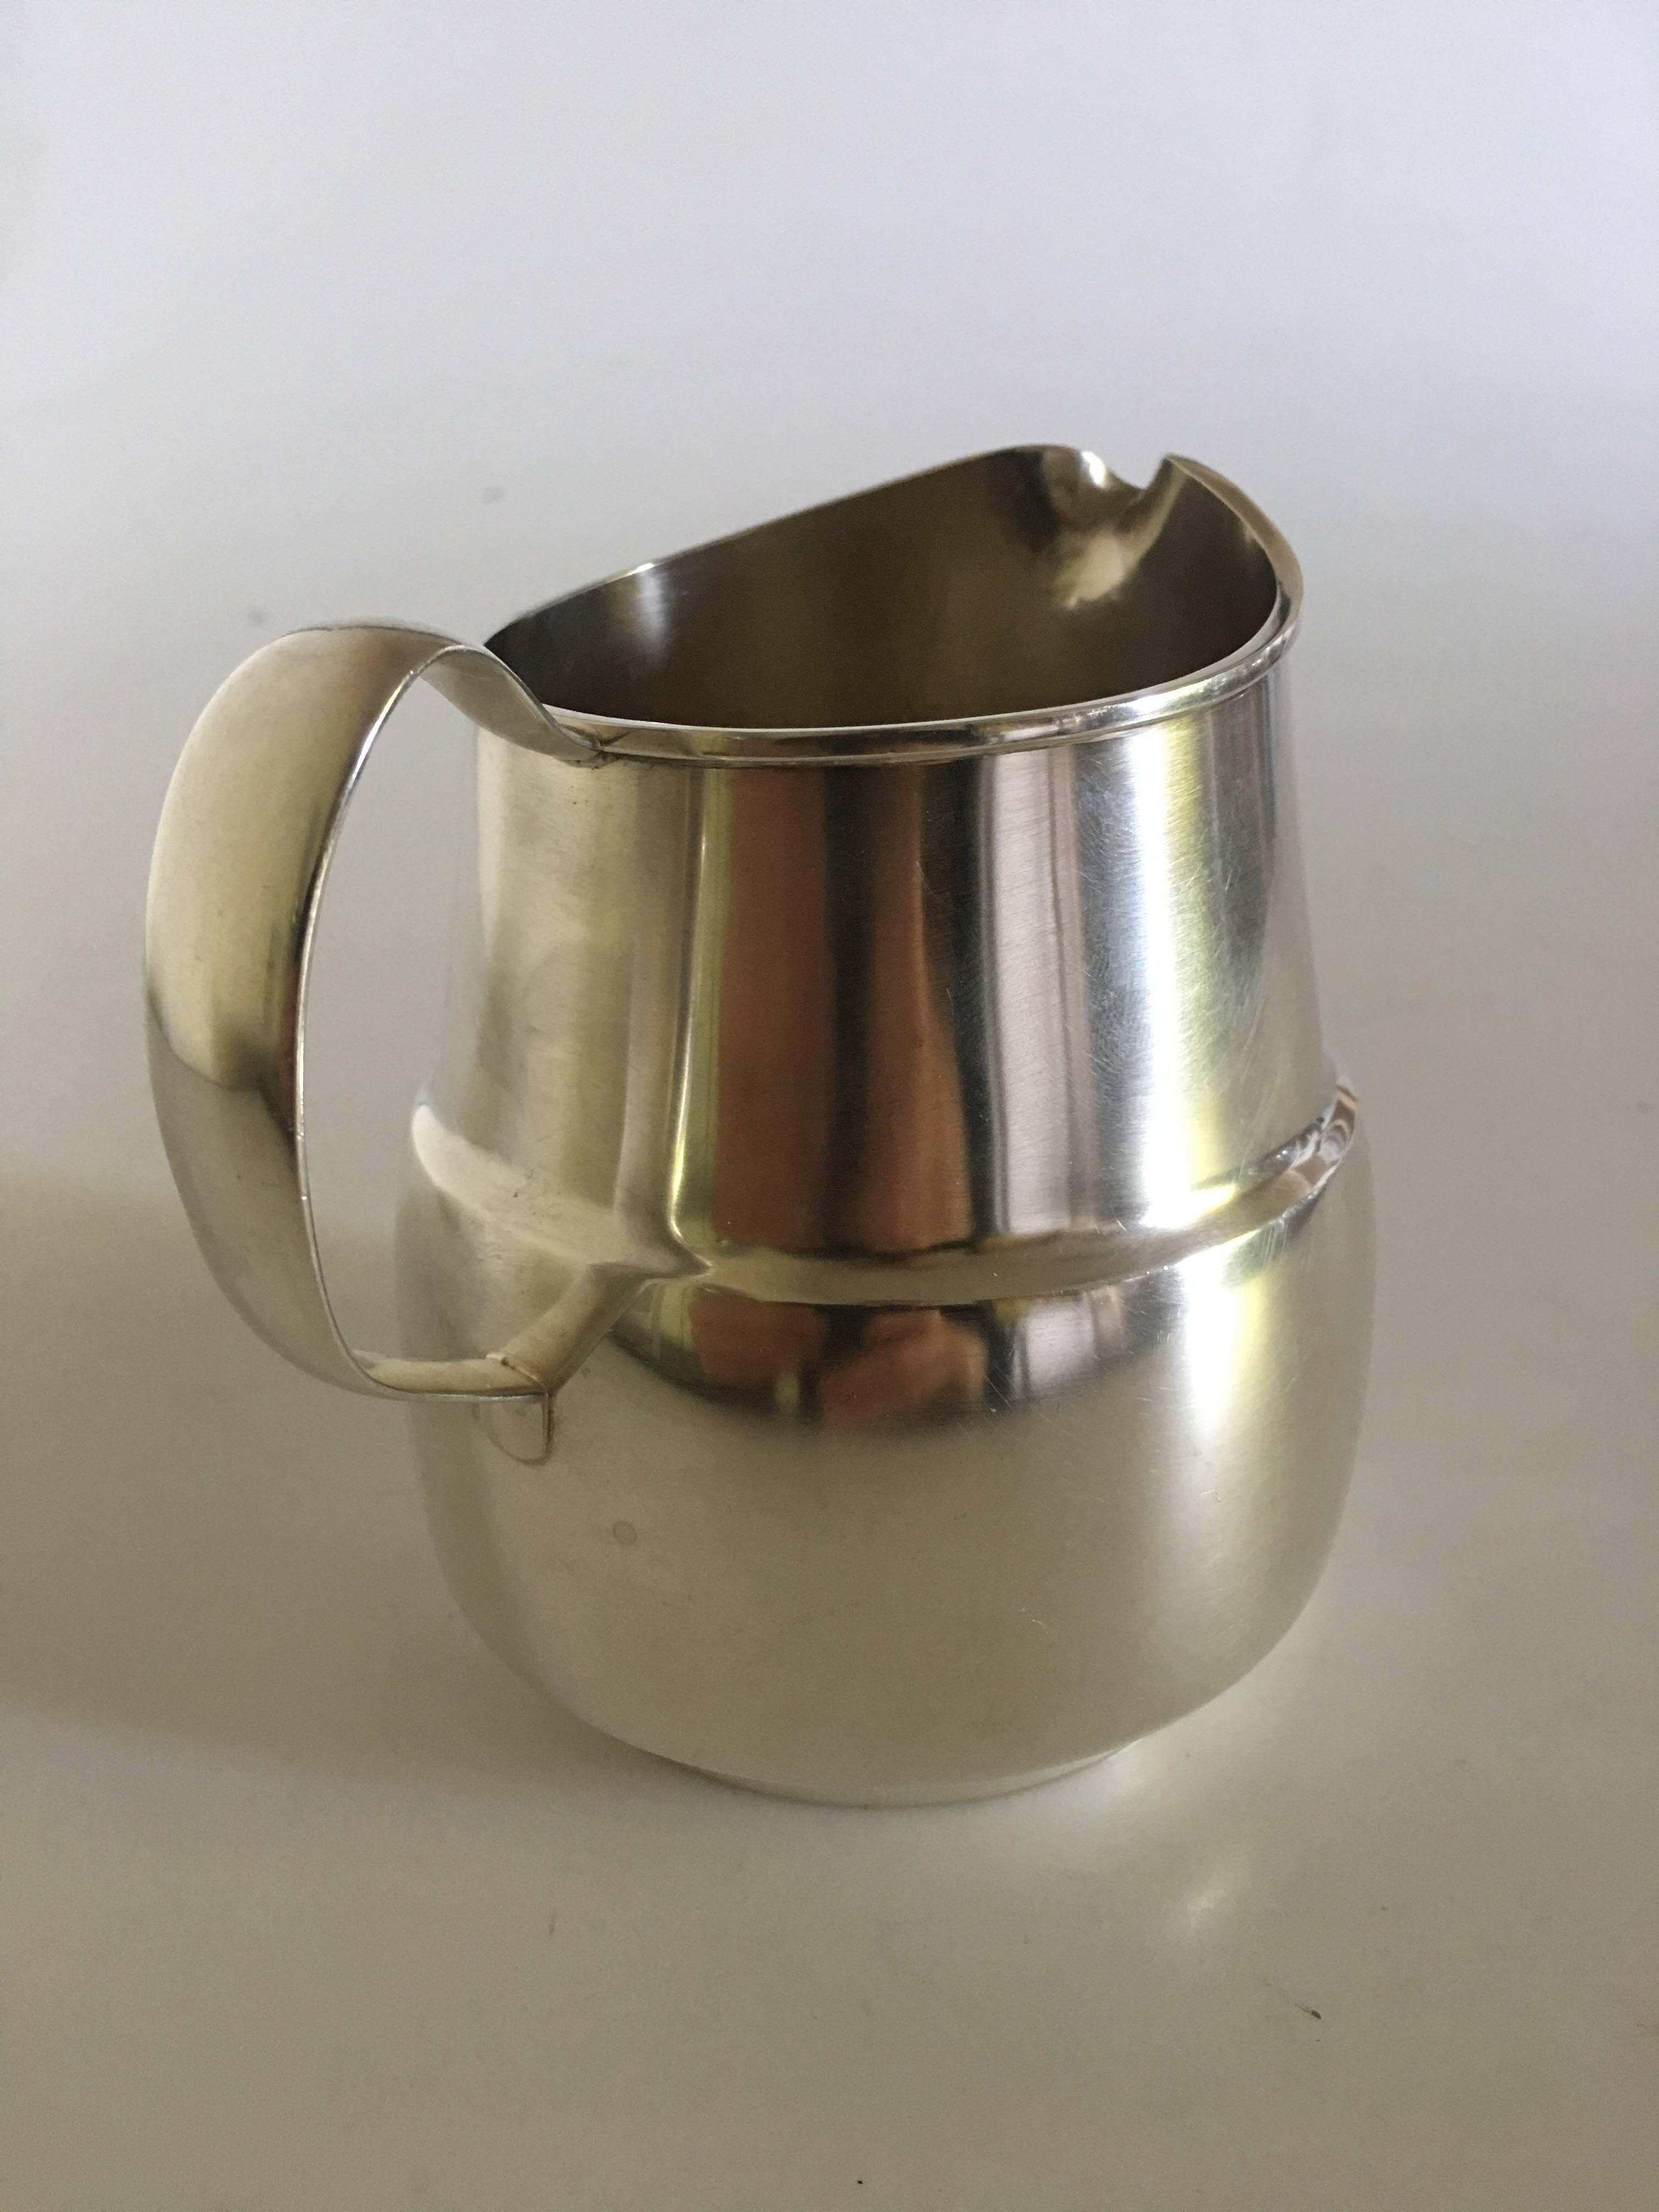 Hans Hansen pitcher in sterling silver designed by Karl Gustav Hansen in 1989.

Done as a yearly hollowware piece in 100 copies.

Measures 11.5cm / 4 1/2